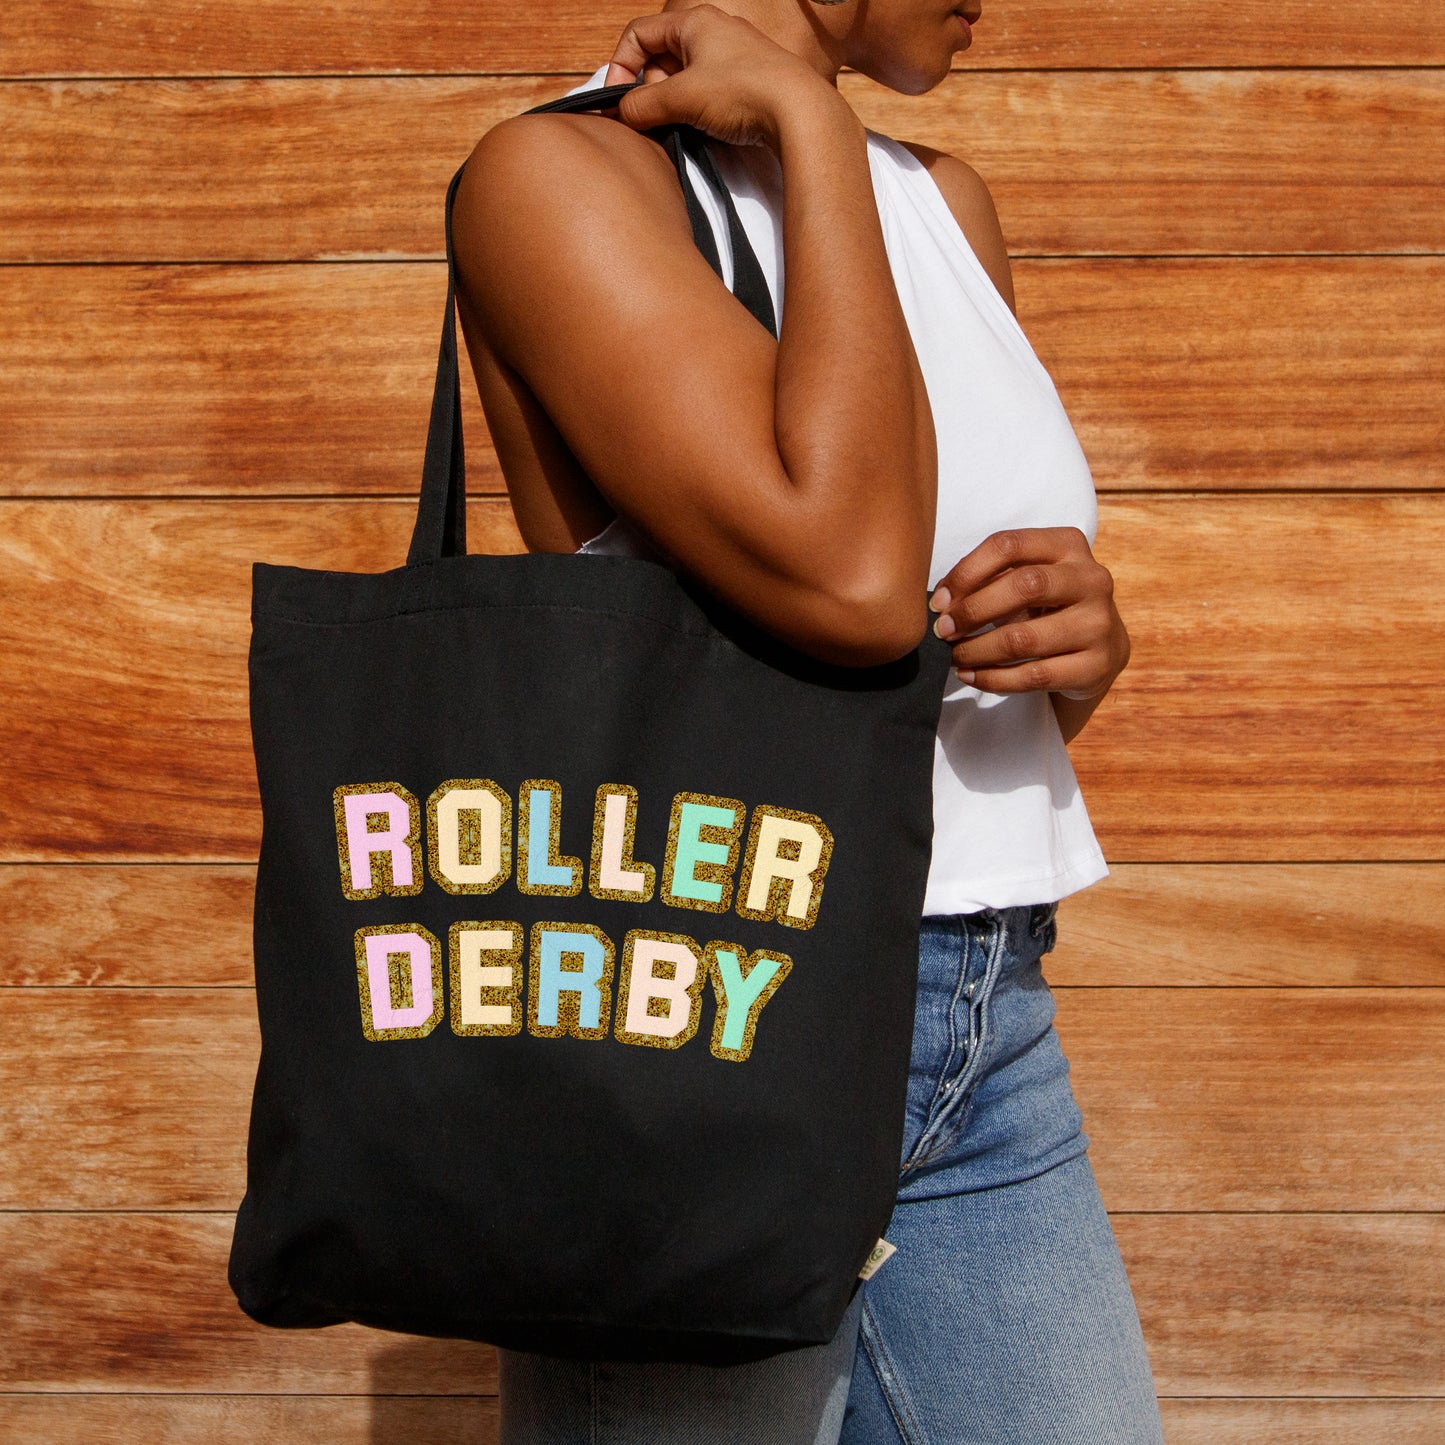 Pastels and Glitter Roller Derby Tote Bag